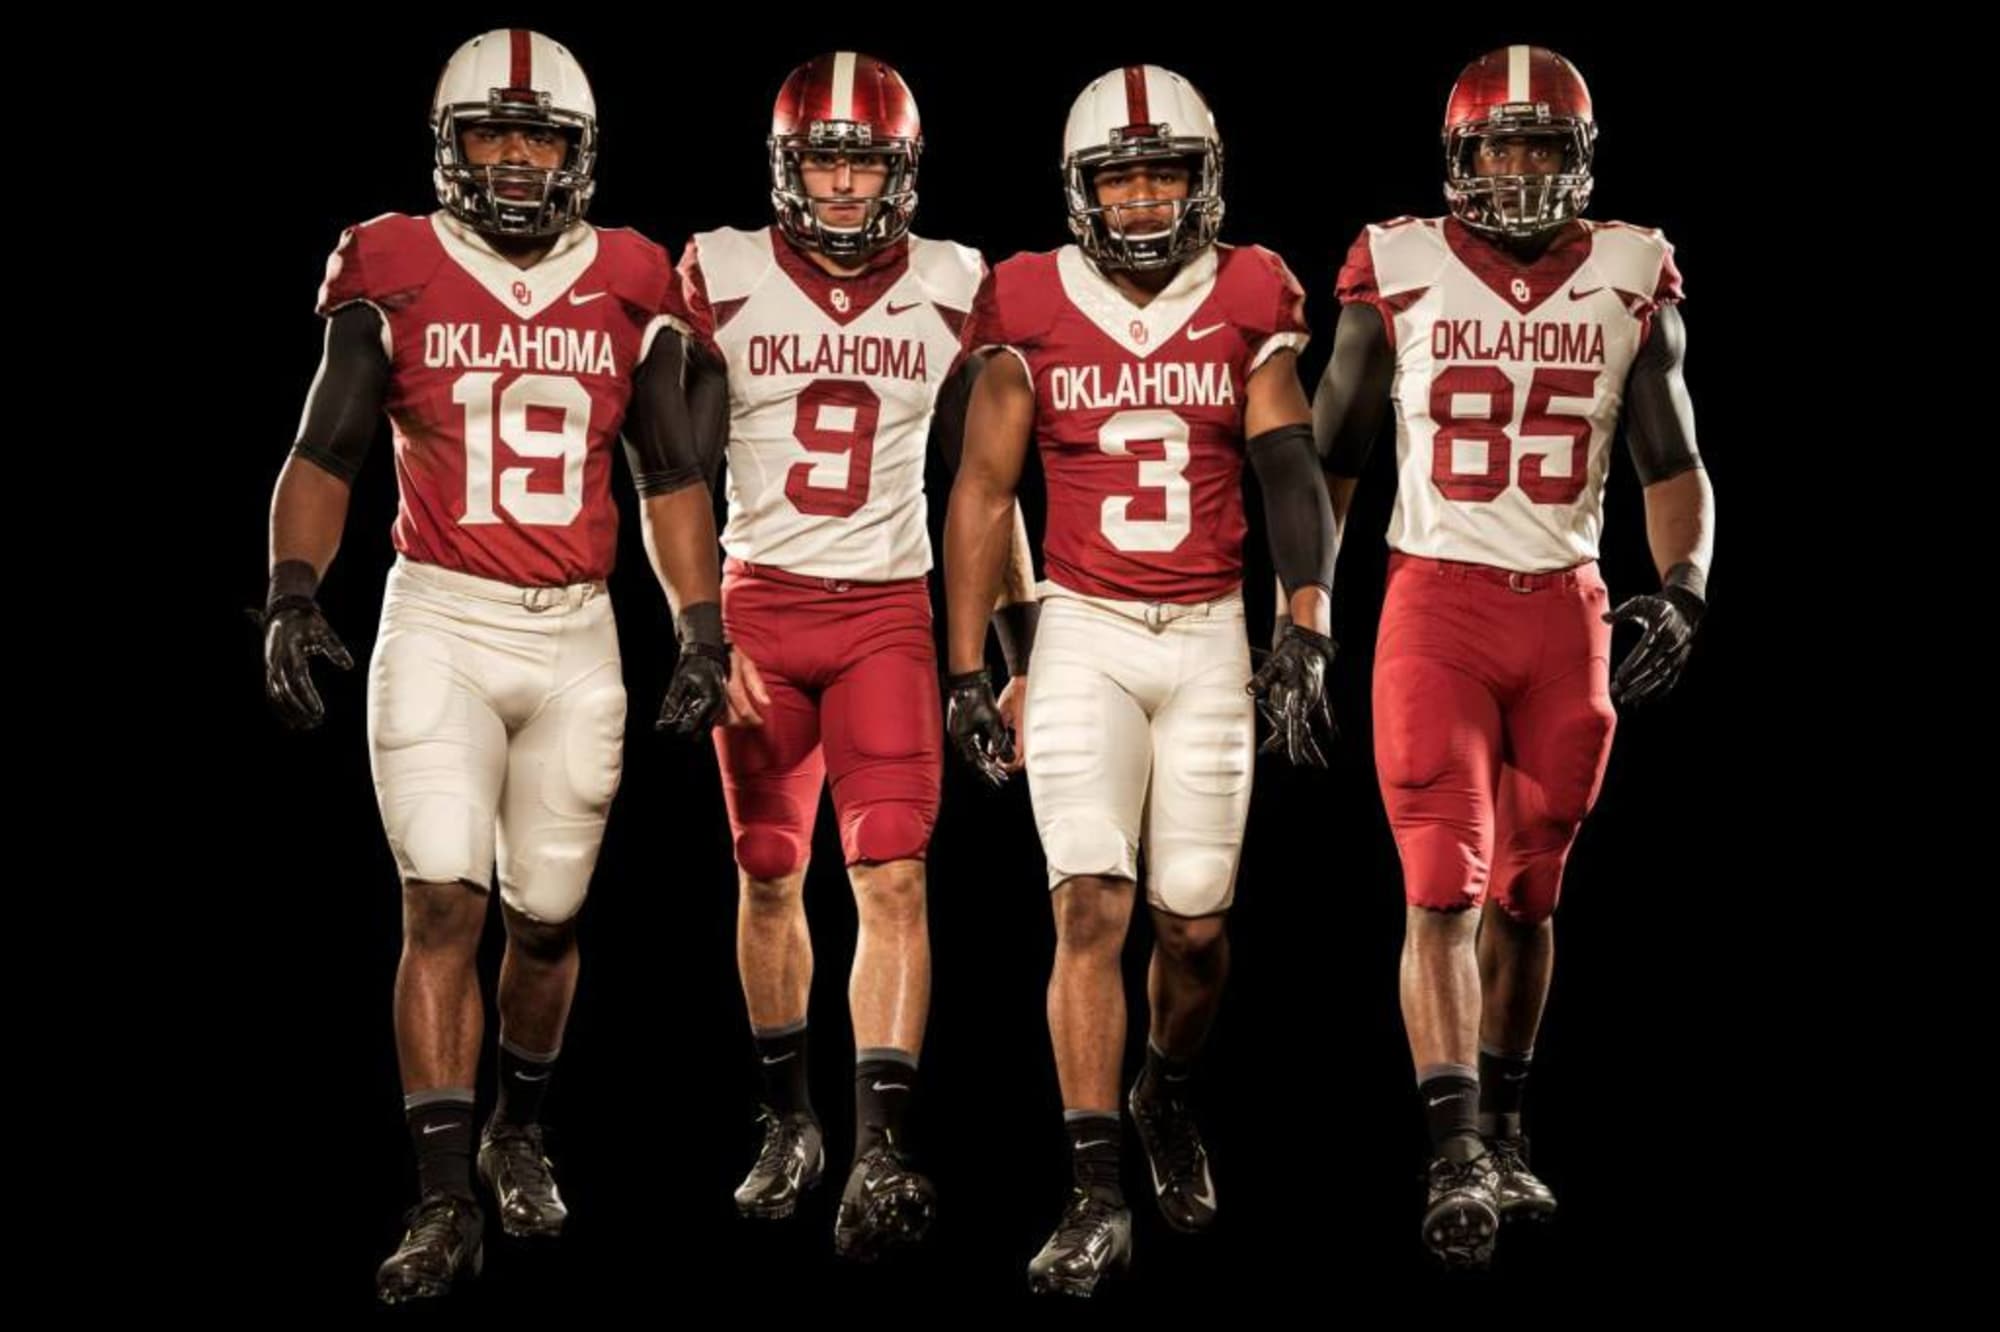 Oklahoma Football Uniforms | Hot Sex Picture